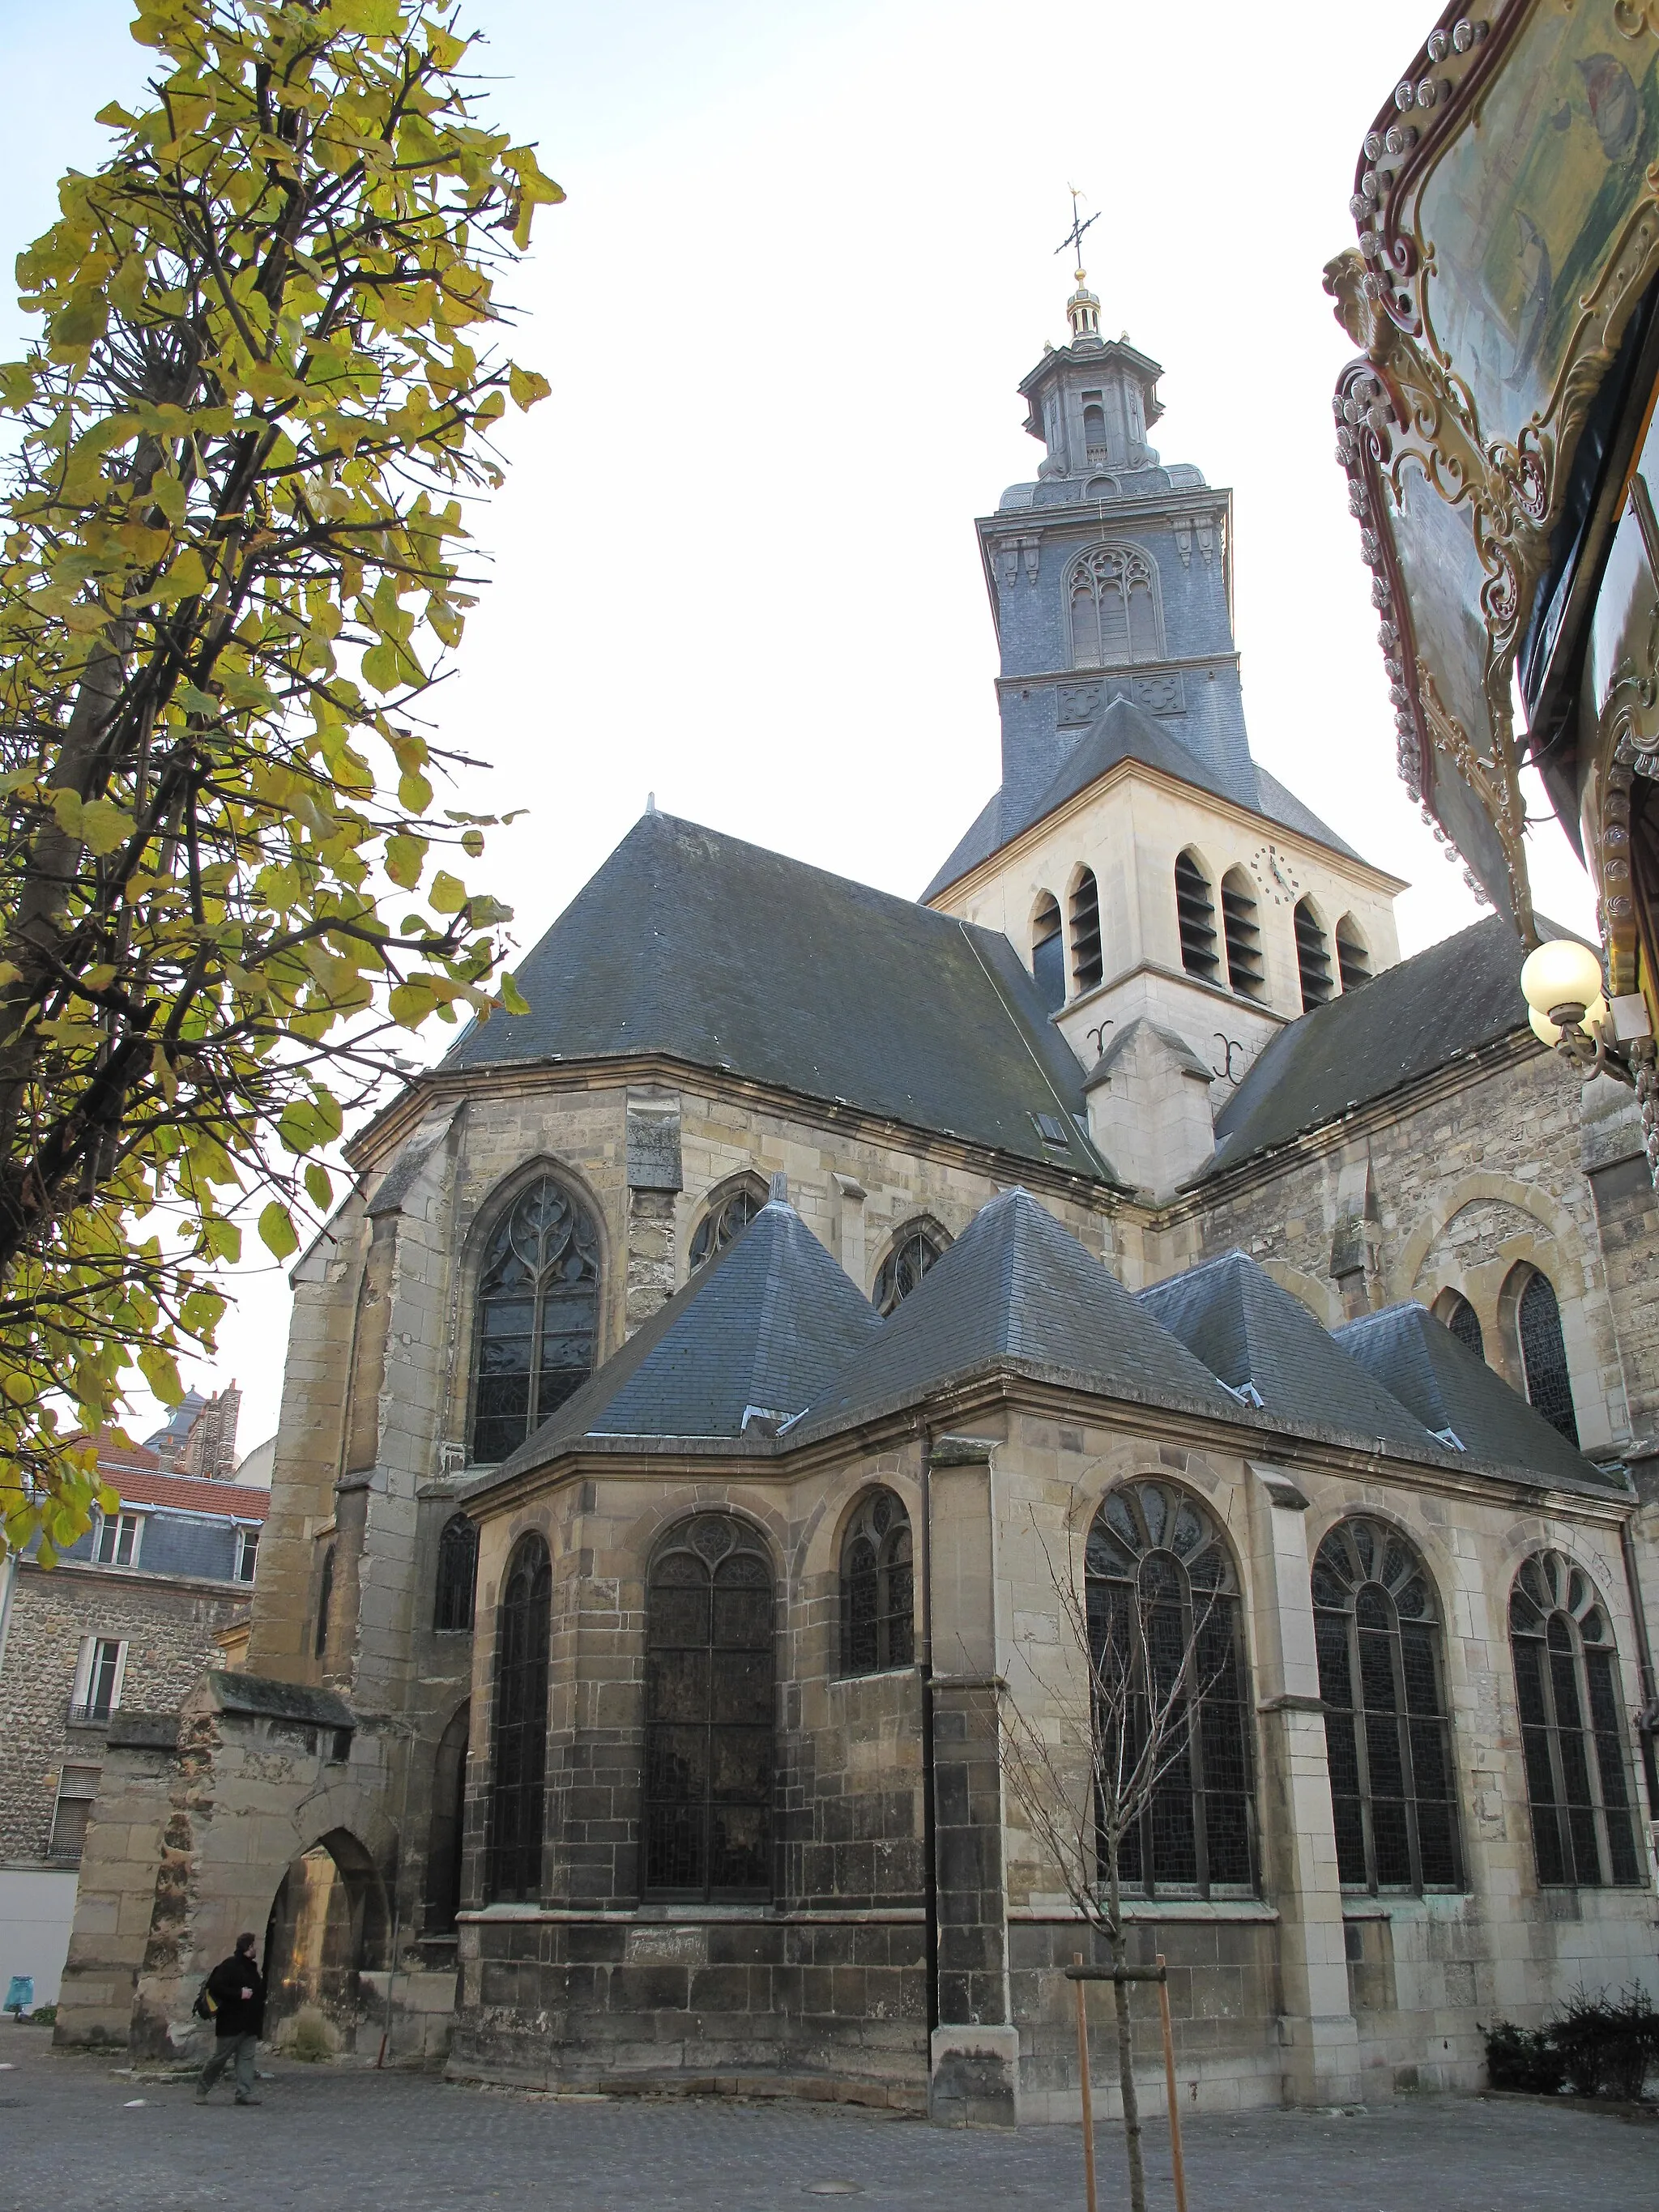 Photo showing: Apse of the Saint-Jacques church in Reims (Marne, France).